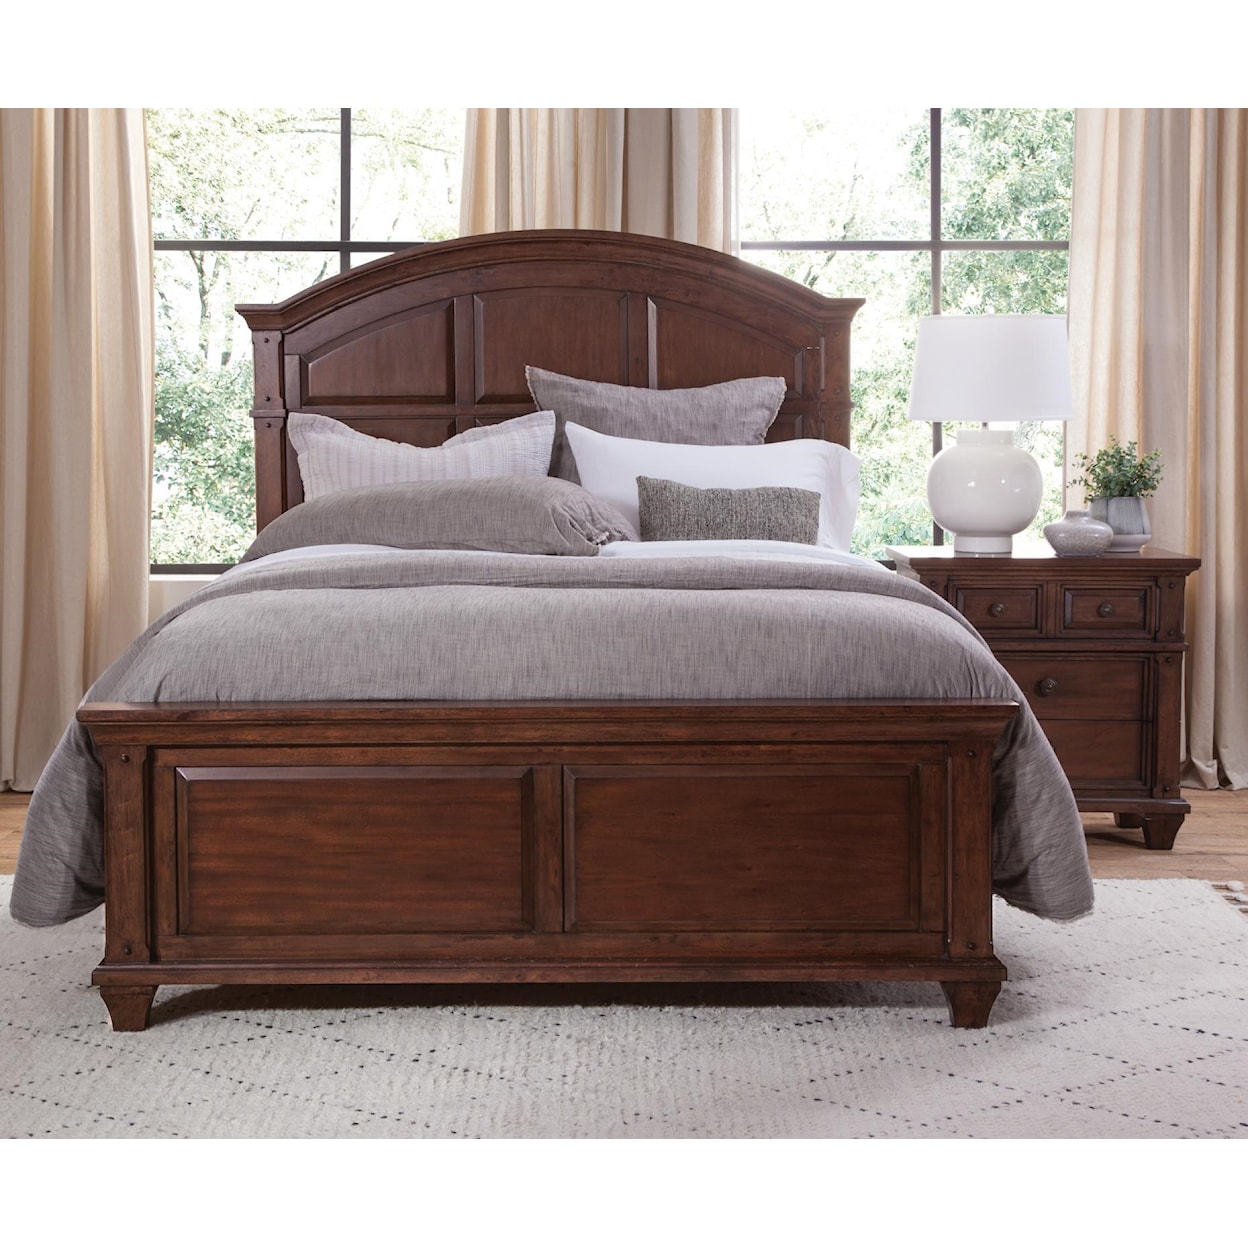 American Woodcrafters 2400 King Sedona Bed